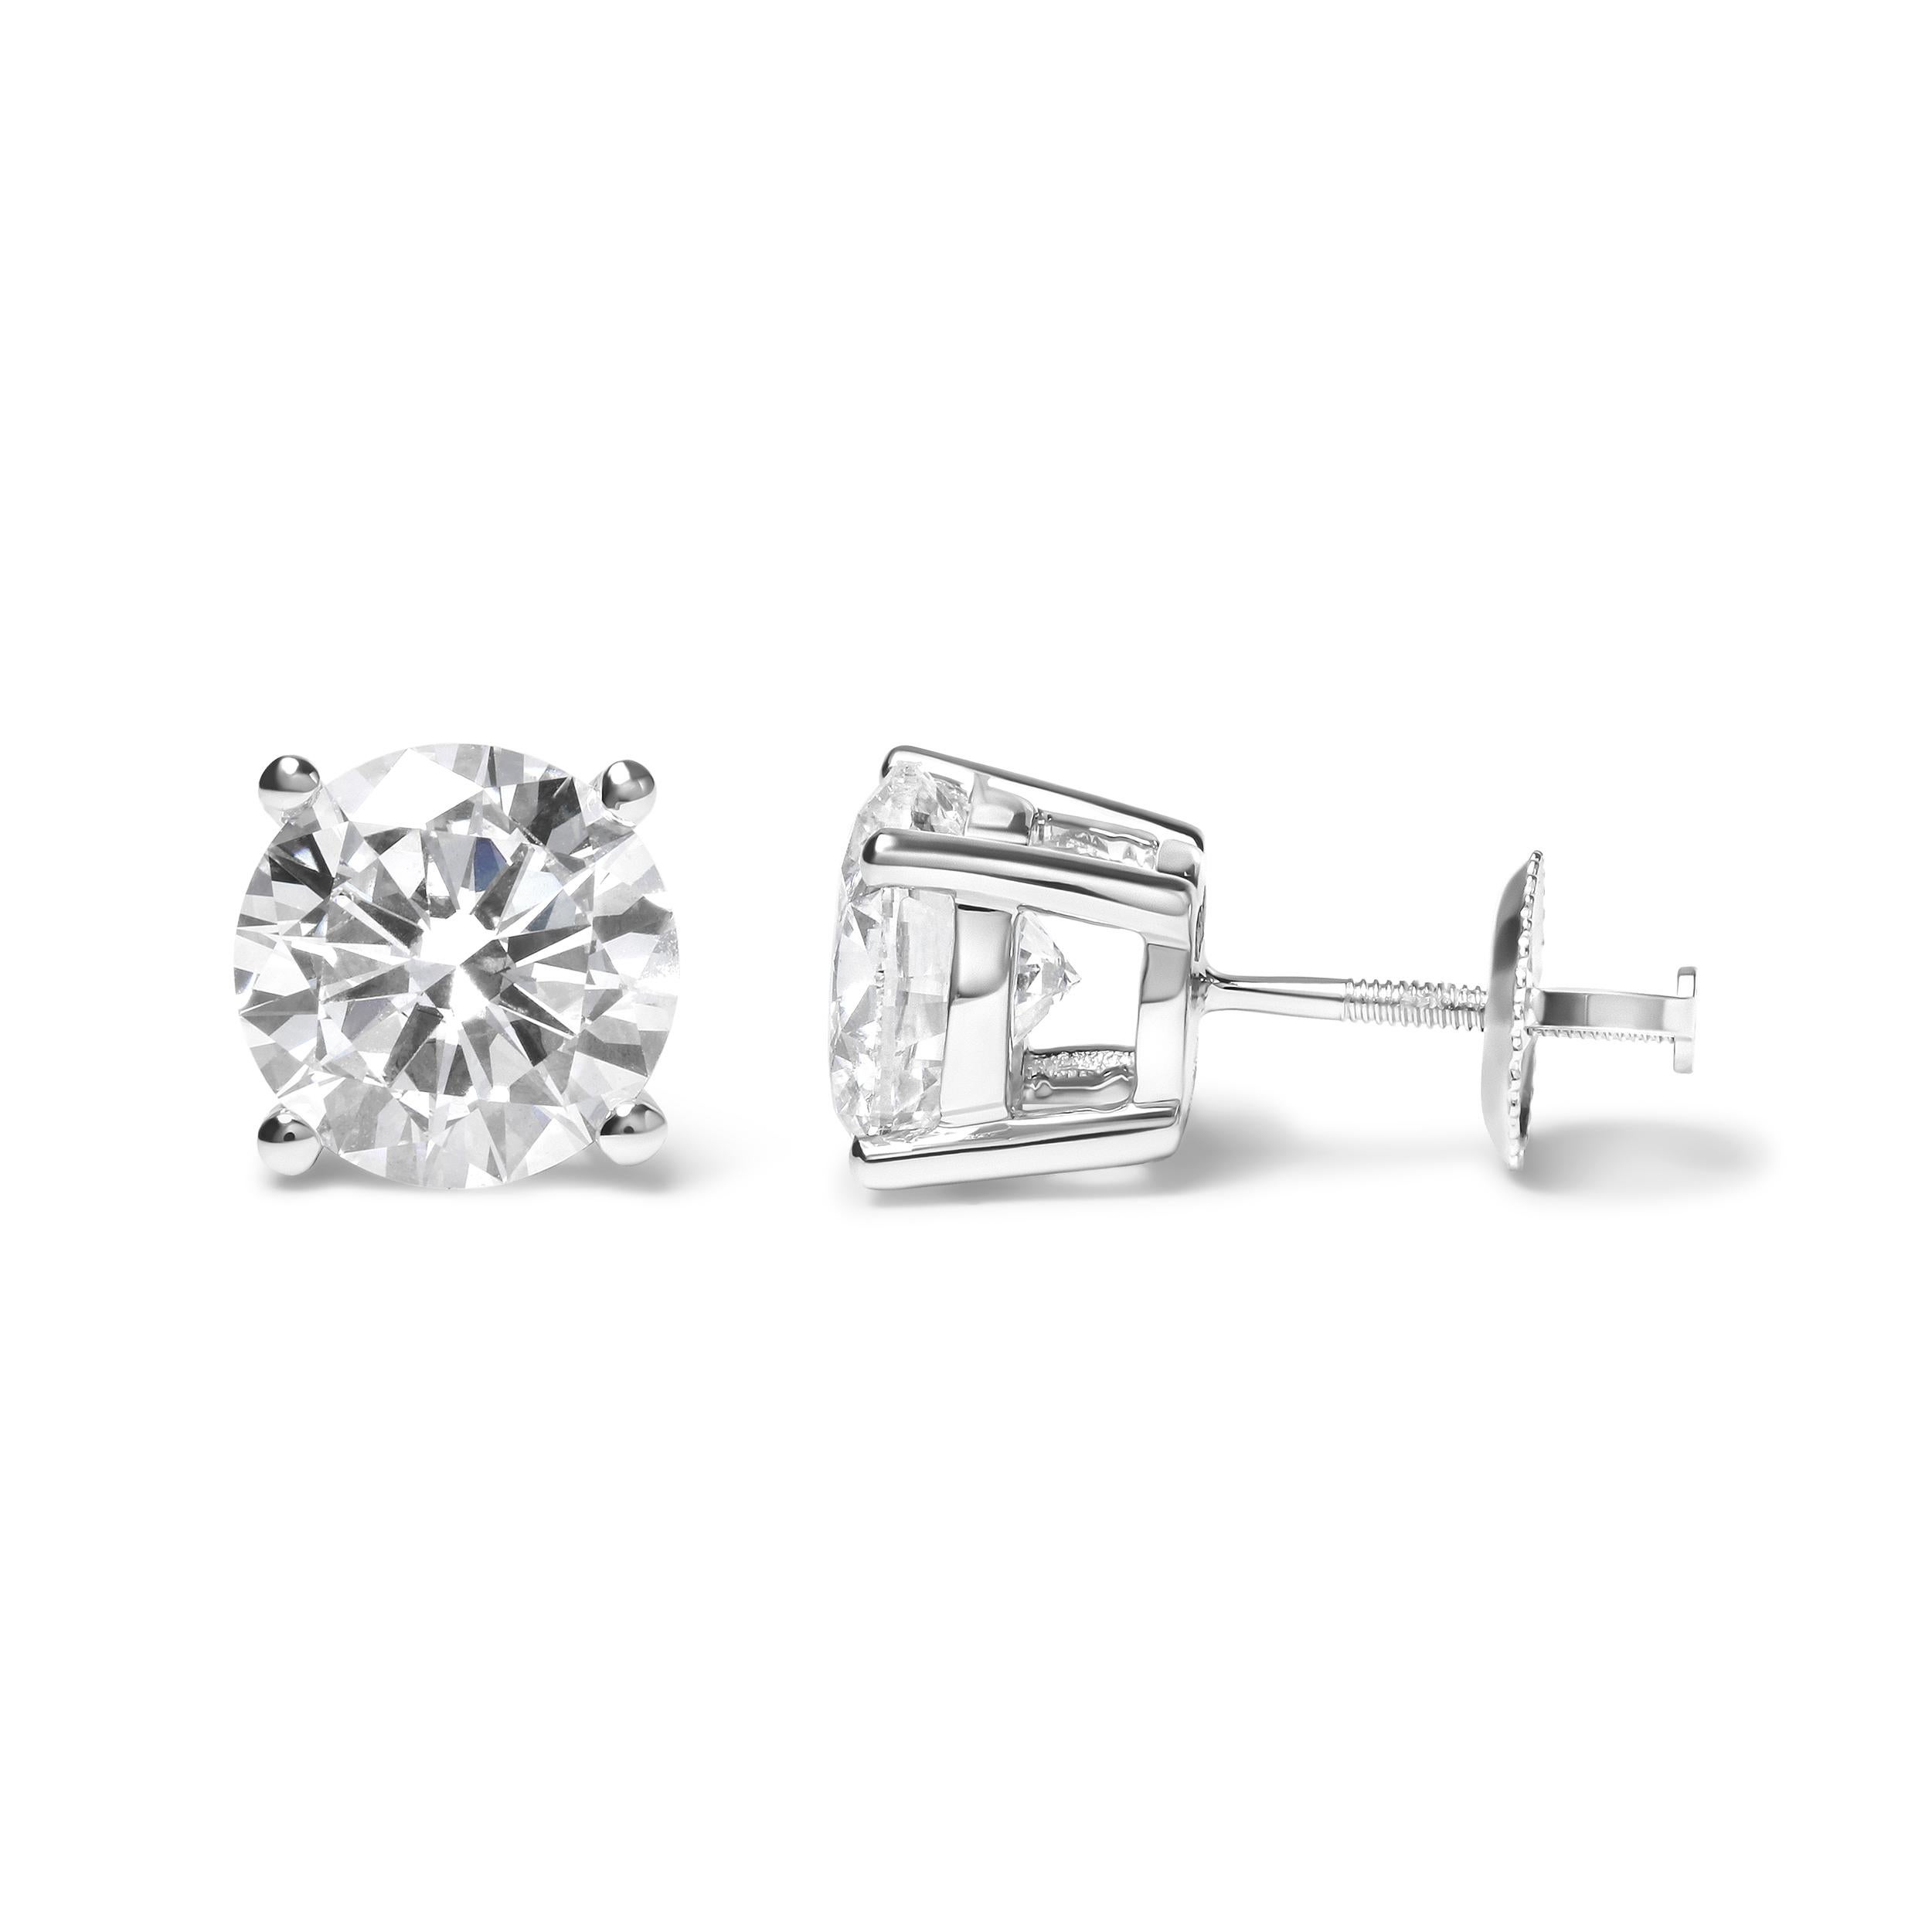 Crafted for the connoisseur of luxury, these exquisite stud earrings exude timeless elegance. Two resplendent, GIA-certified diamonds, each weighing a remarkable 3 carats, are the crowning glory of this pair. These round brilliant-cut gems dazzle